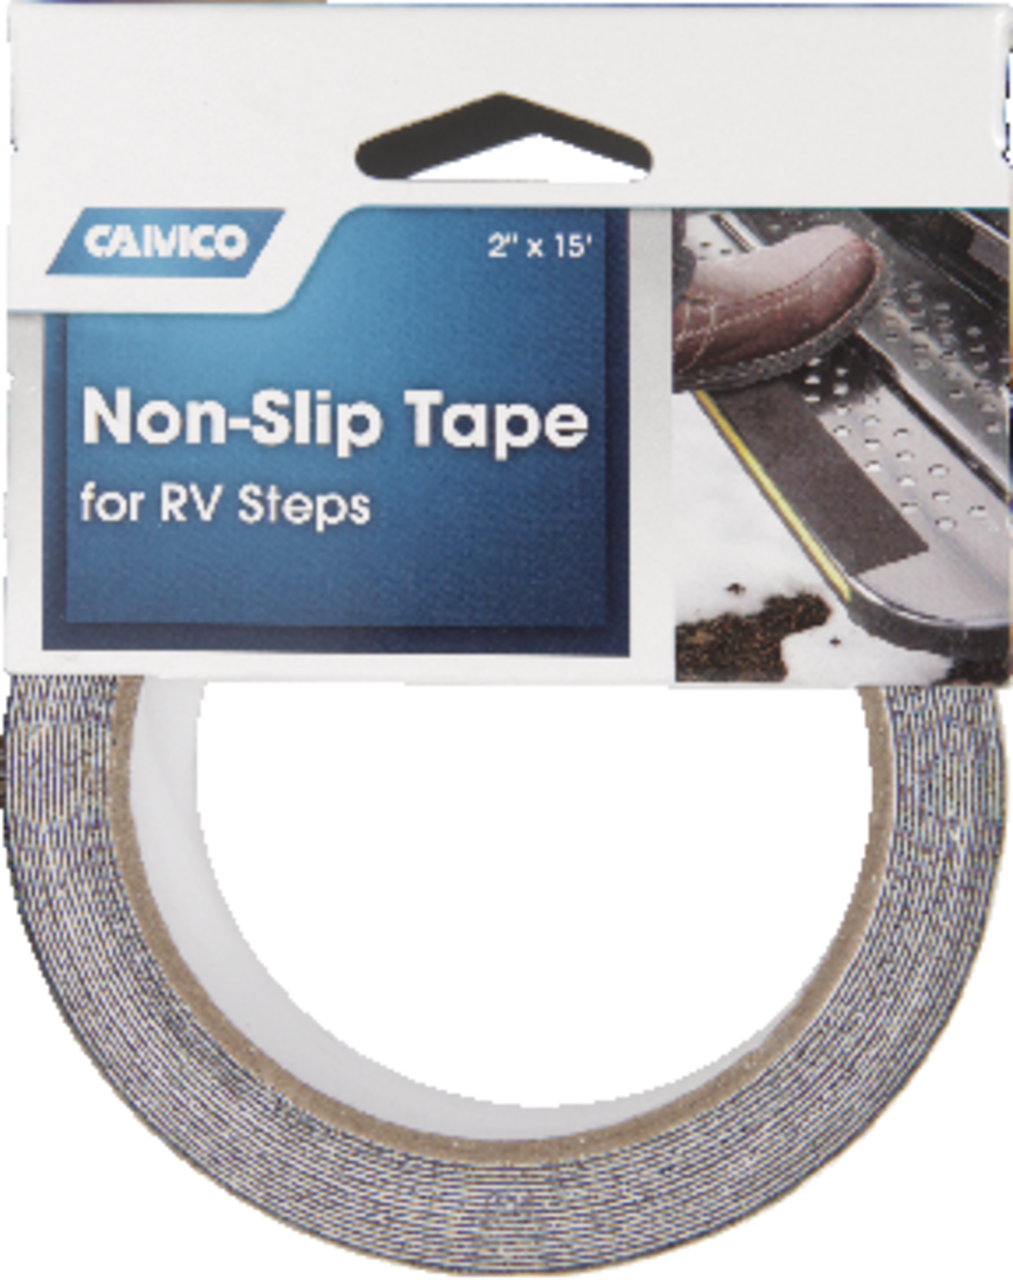 Tape King Anti Slip Traction Tape - 4 Inch x 30 Foot - Best Grip, Friction,  Abrasive Adhesive for Stairs, Safety, Tread Step, Indoor, Outdoor - Black